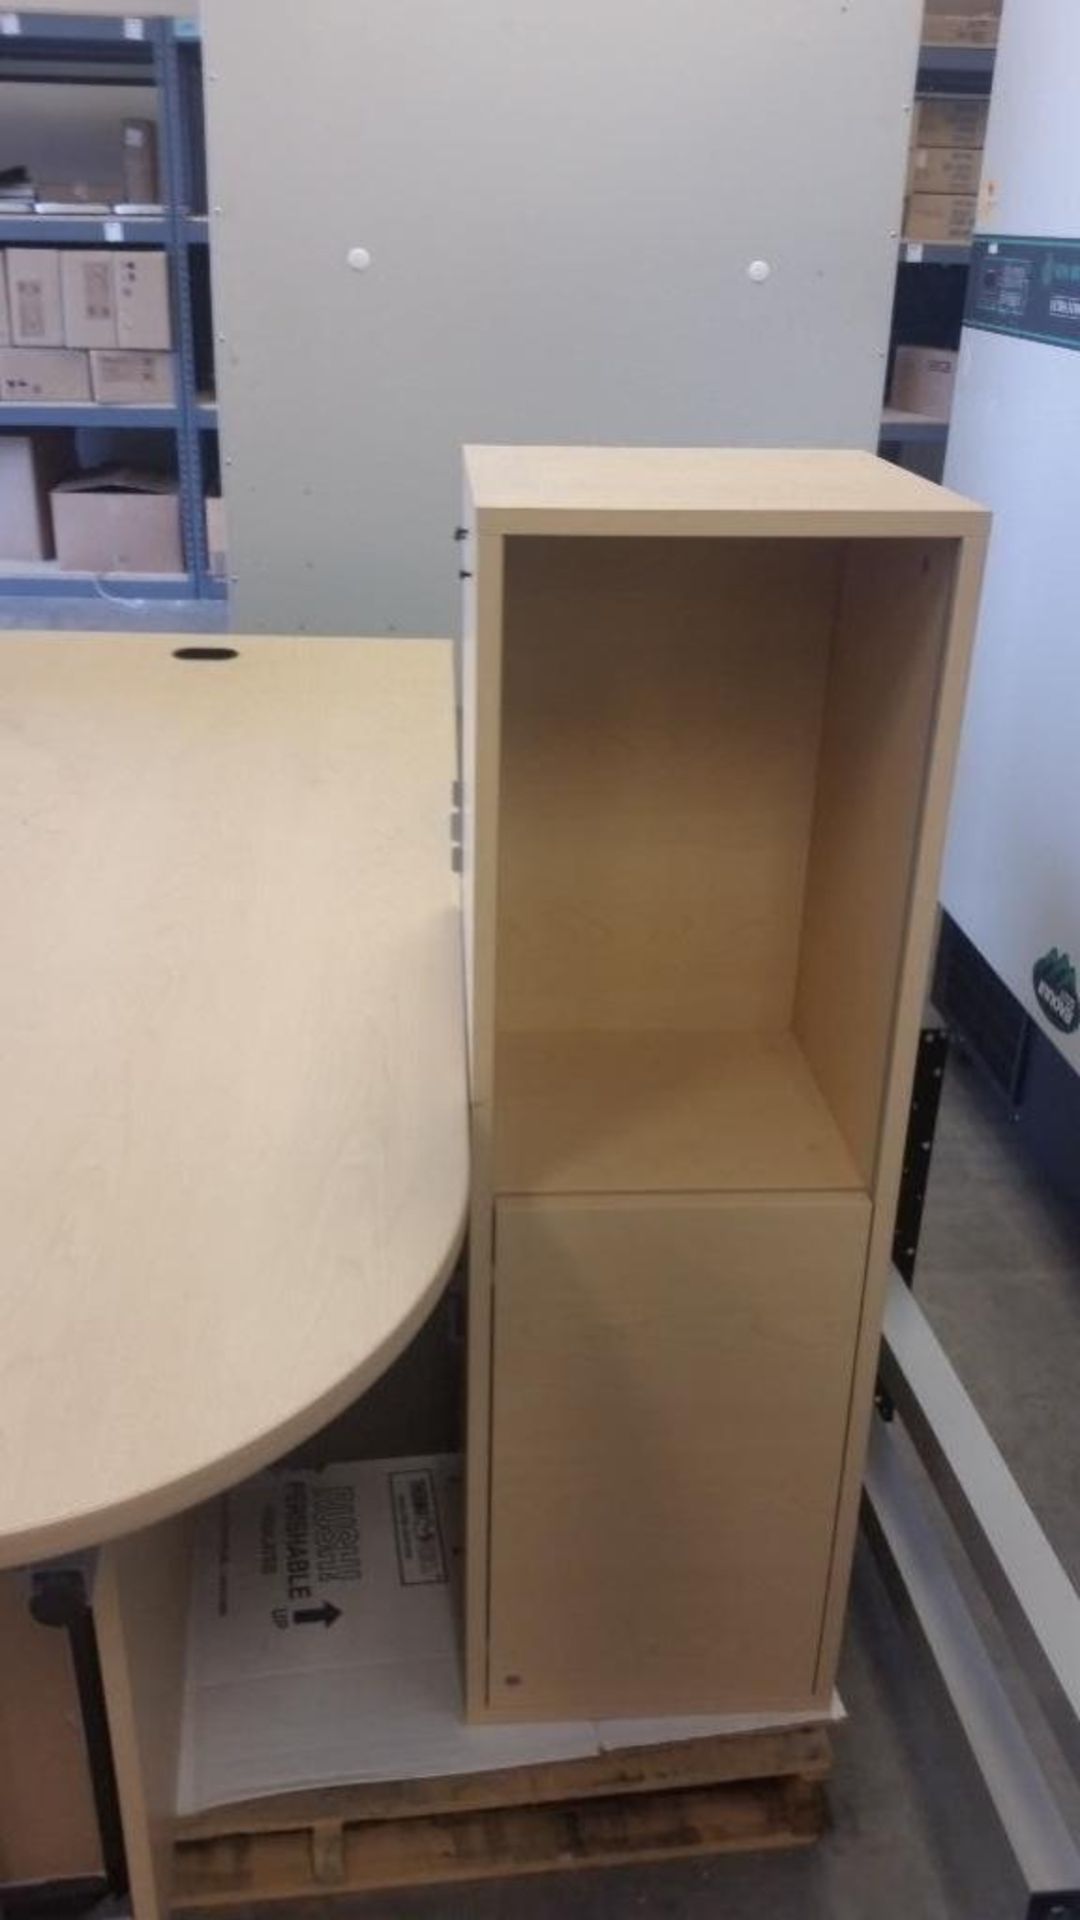 Allsteel L-shape desk with overhead cabinets and (3) drawers. The unit is disassembled. - Image 2 of 2